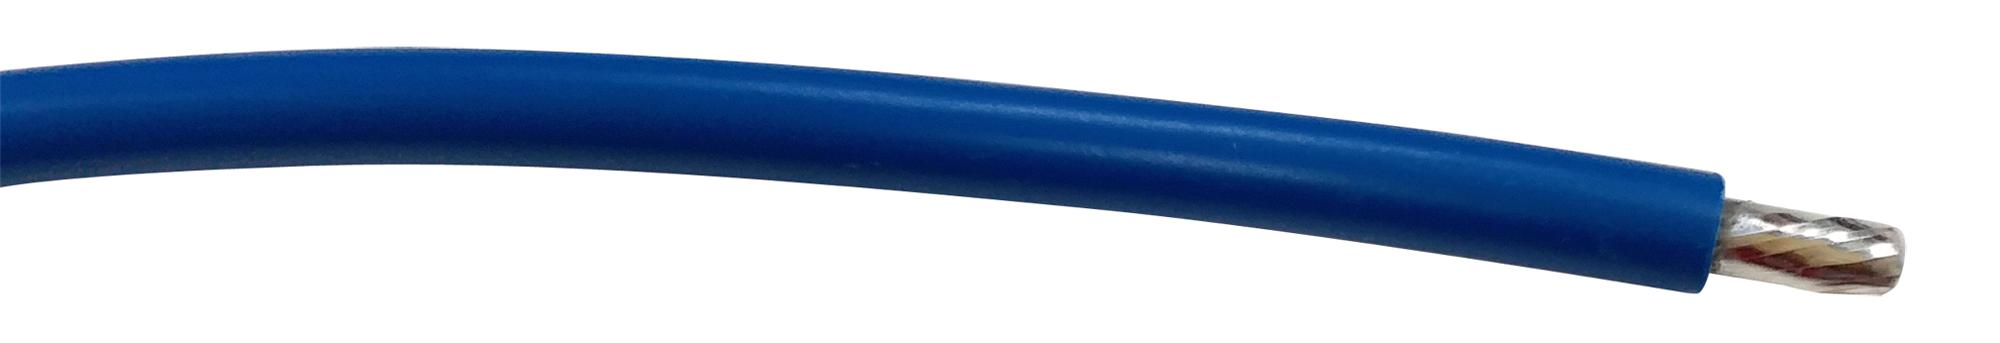 PP002553 CABLE WIRE, 20AWG, BLUE, 305M PRO POWER